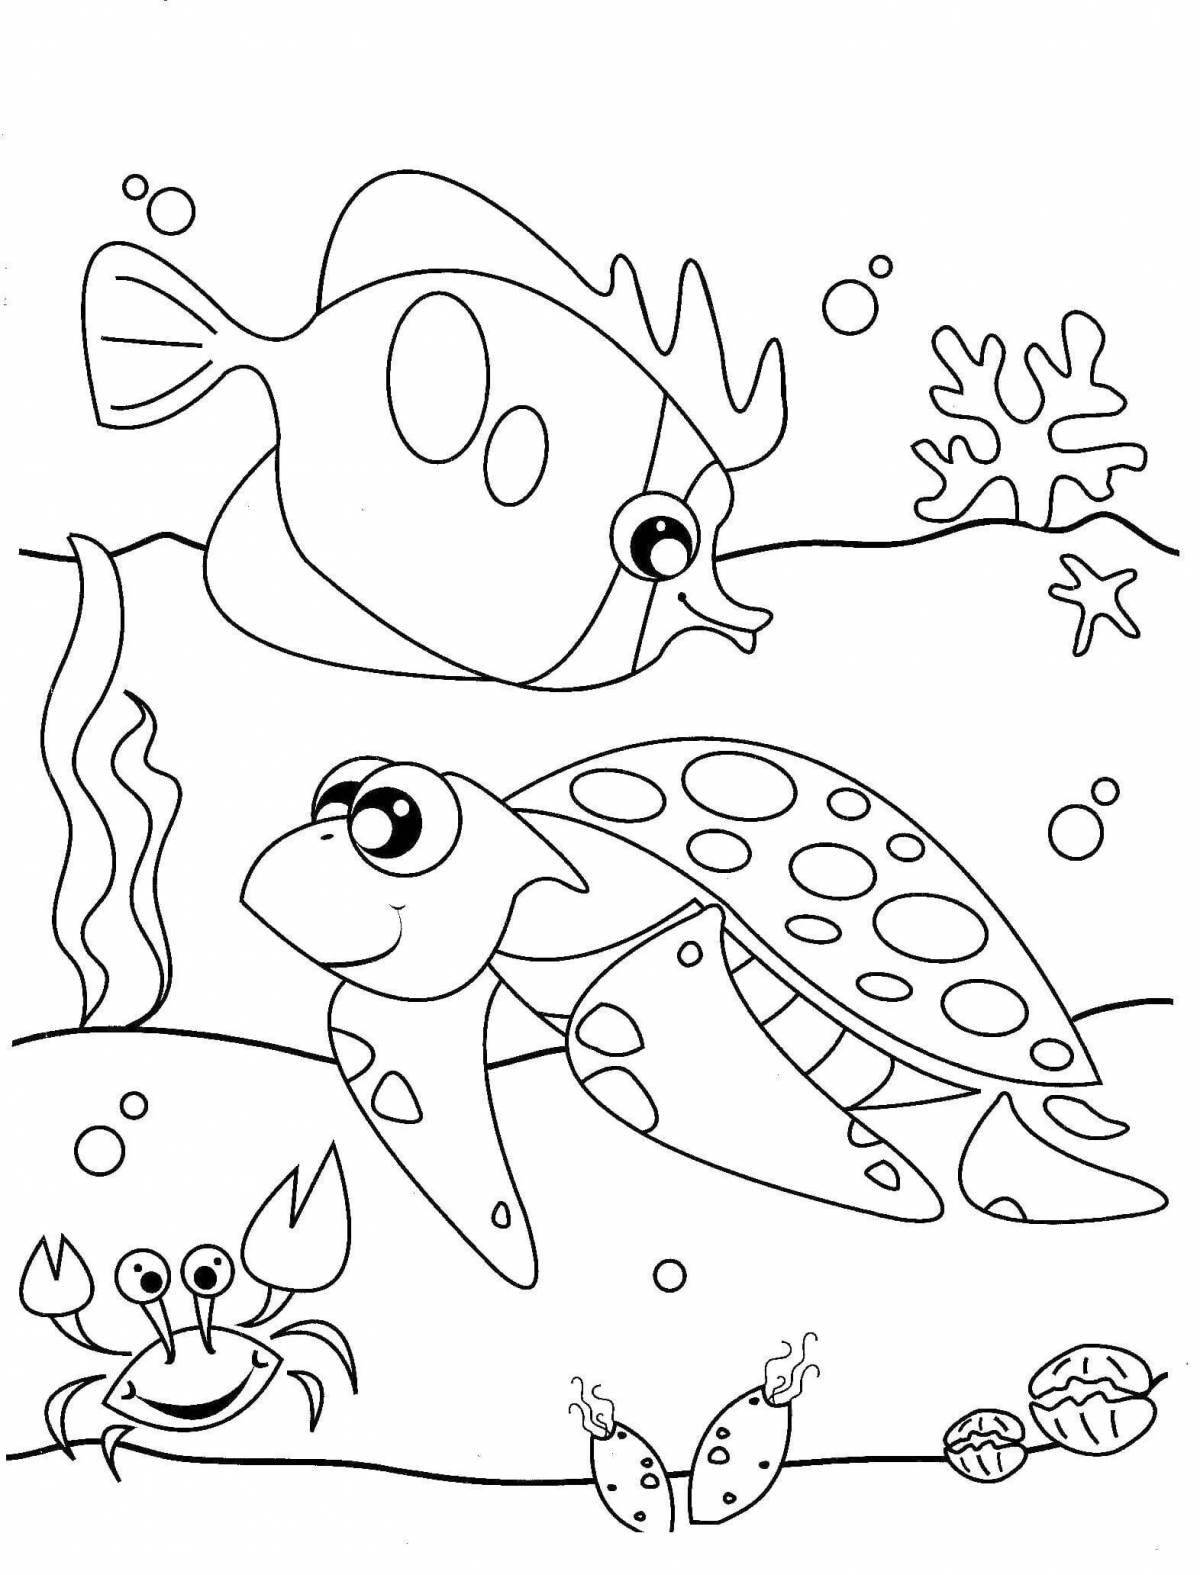 Sea life for children 6 7 years old #3